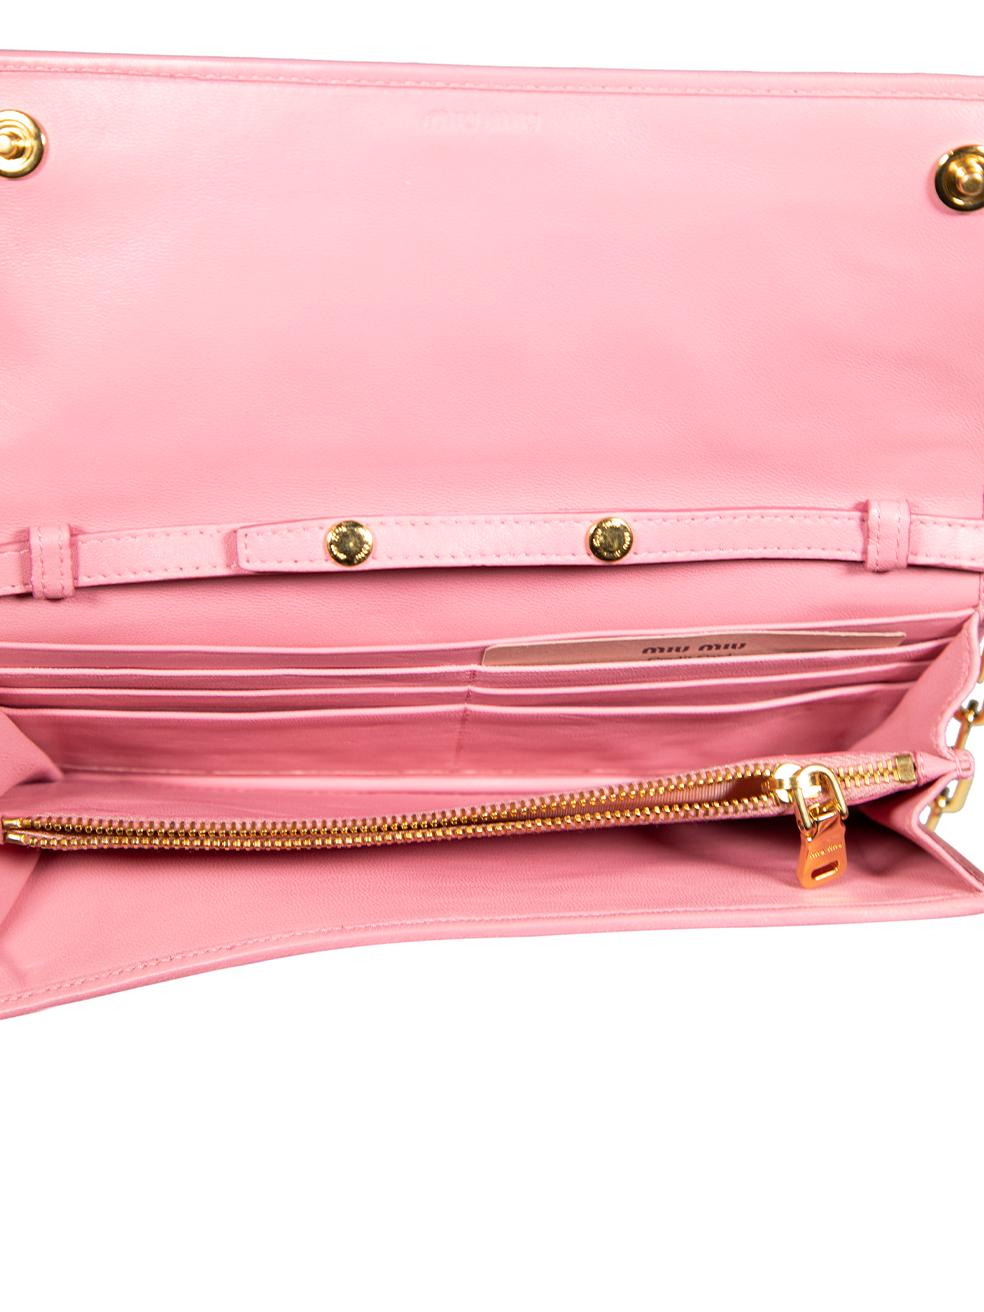 Miu Miu Pink Leather Quilted Wallet on Chain For Sale 1